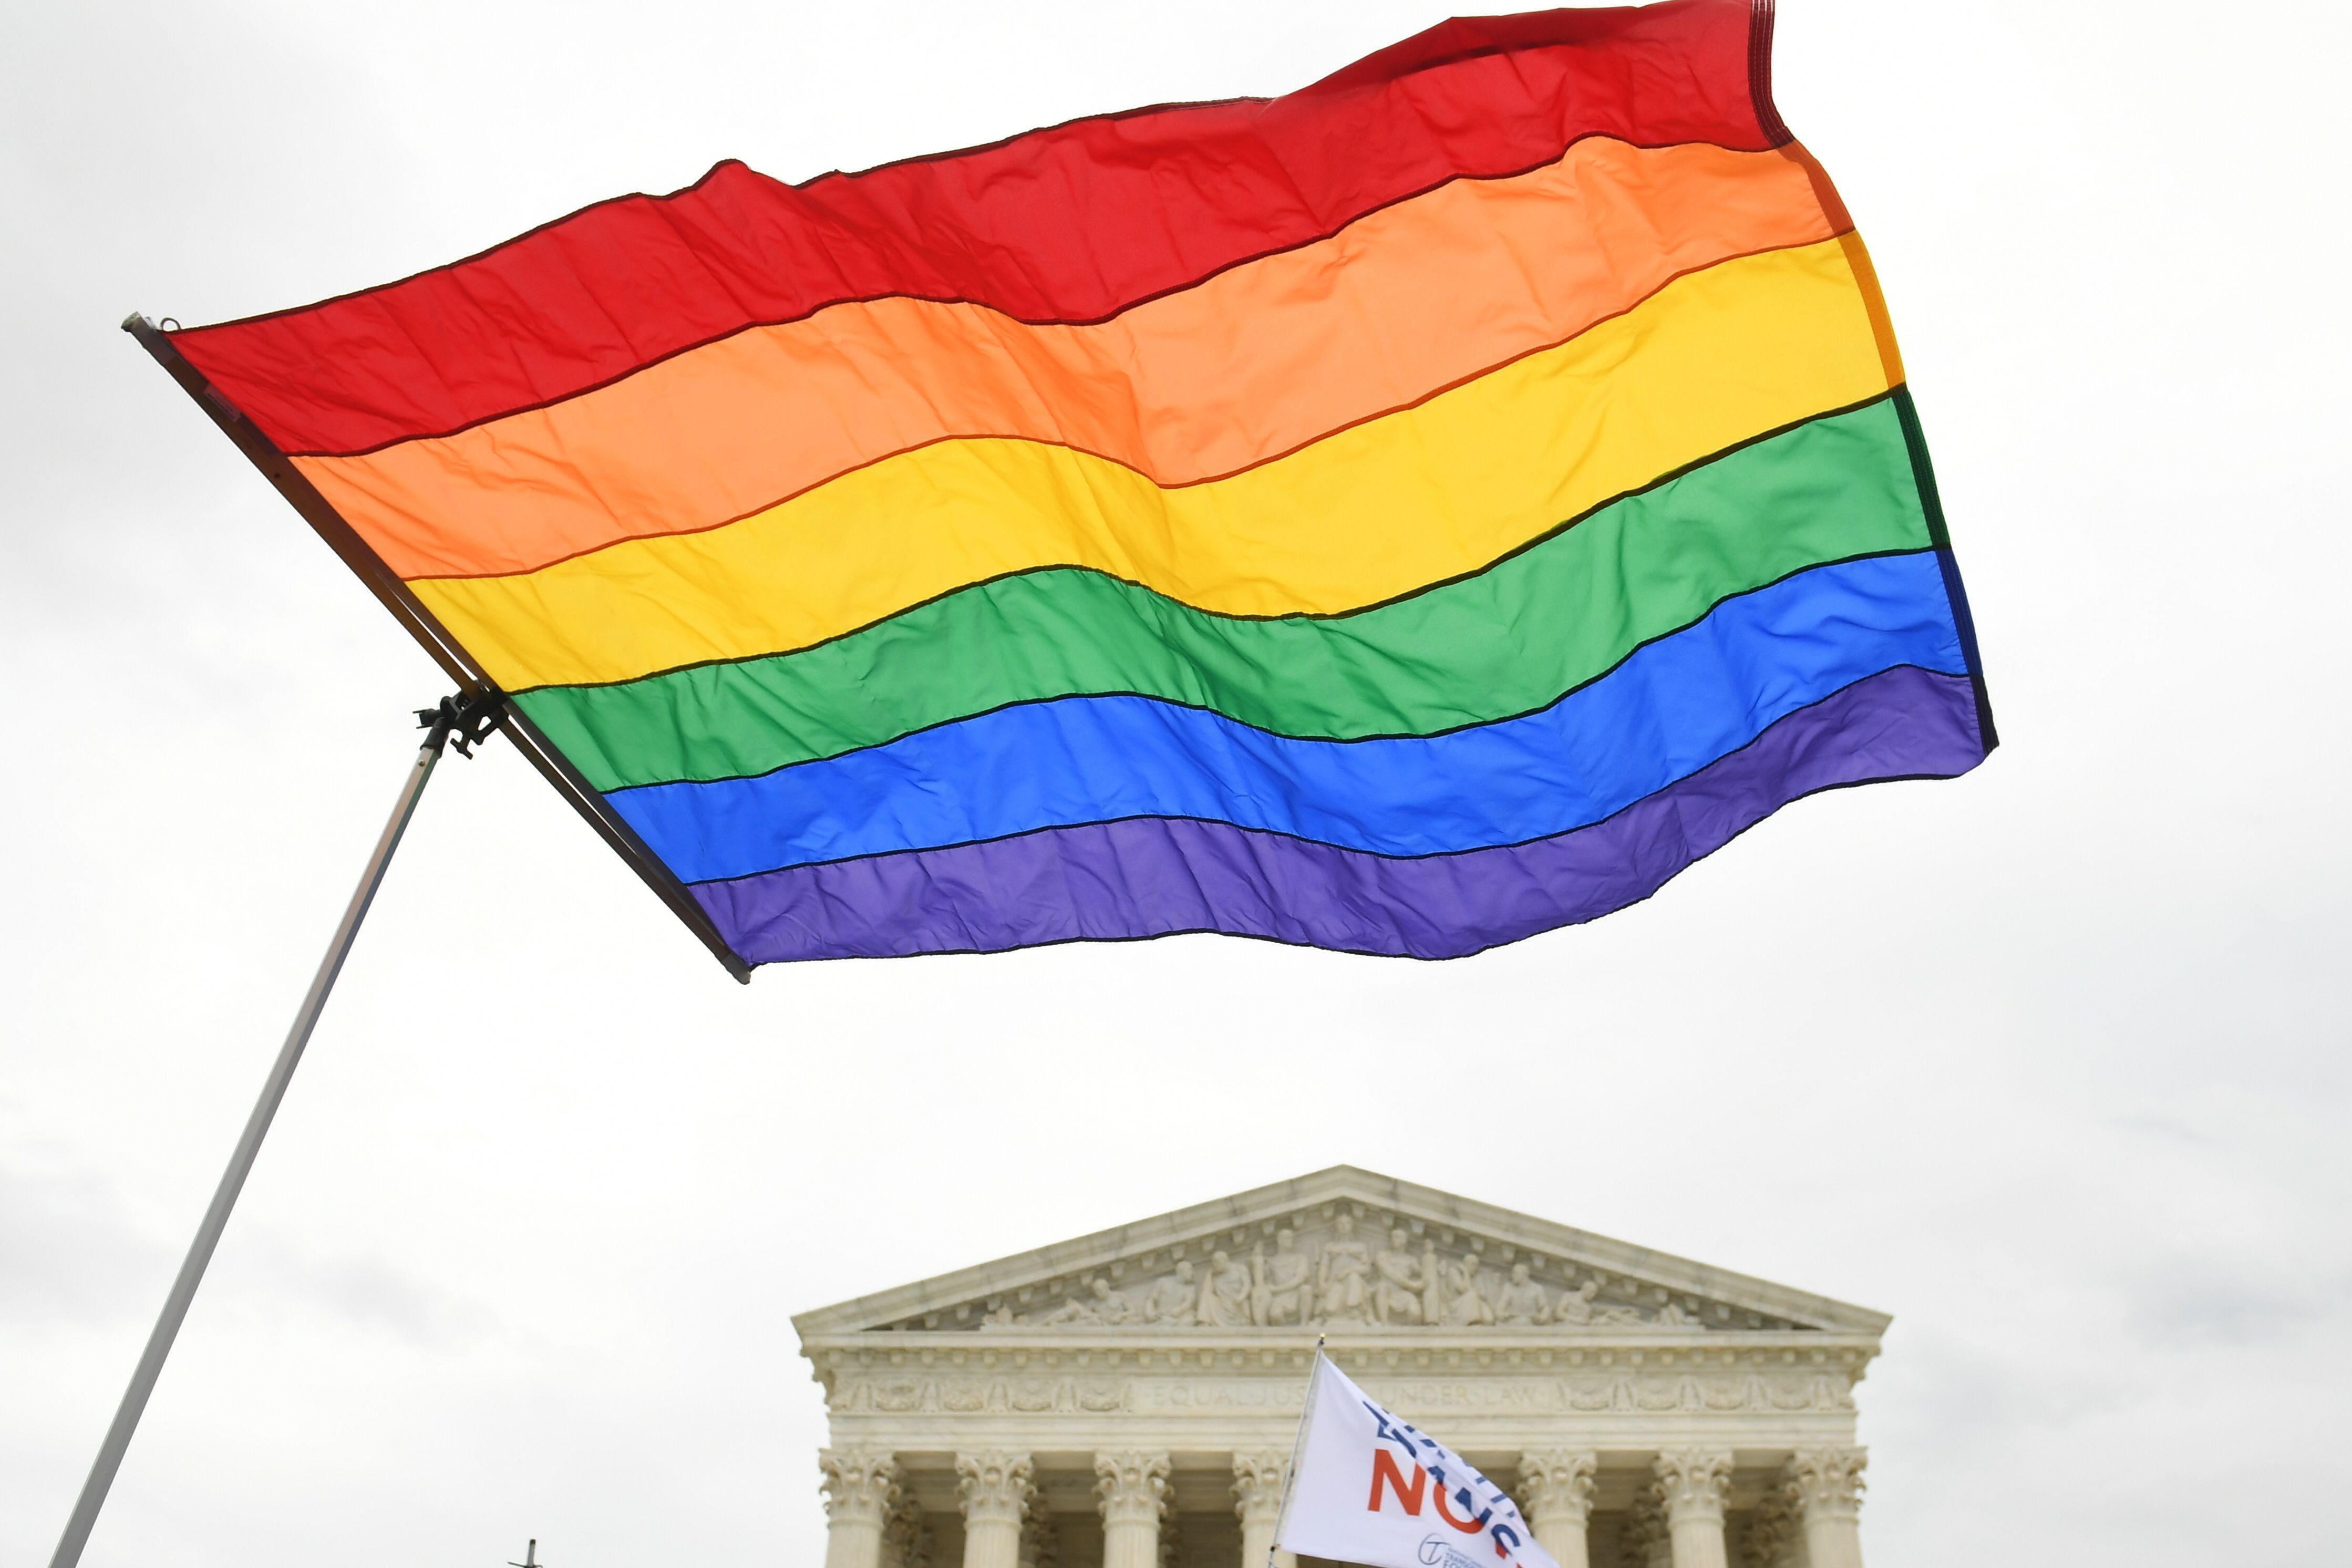 Demonstrators wave a rainbow flag in support of LGBTQ rights outside the Supreme Court.